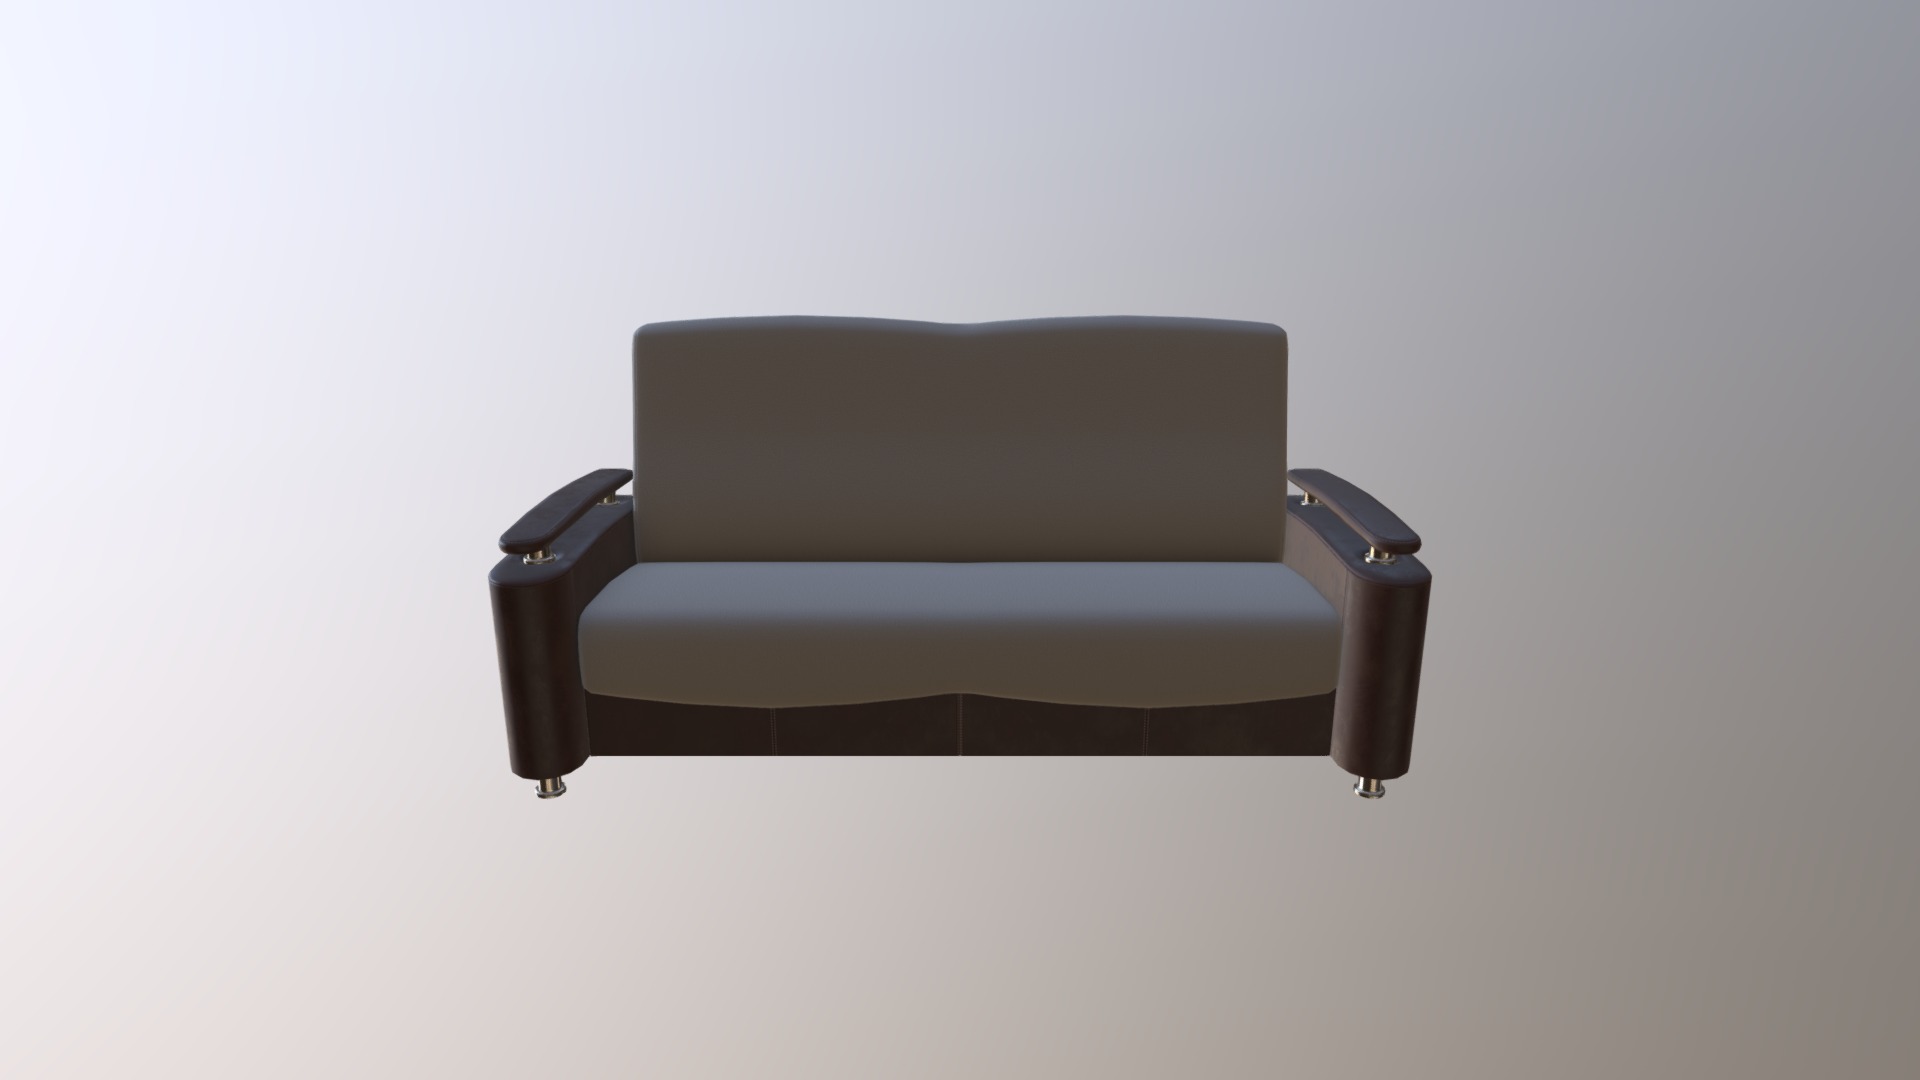 3D model Rondo sofa - This is a 3D model of the Rondo sofa. The 3D model is about a grey office chair.